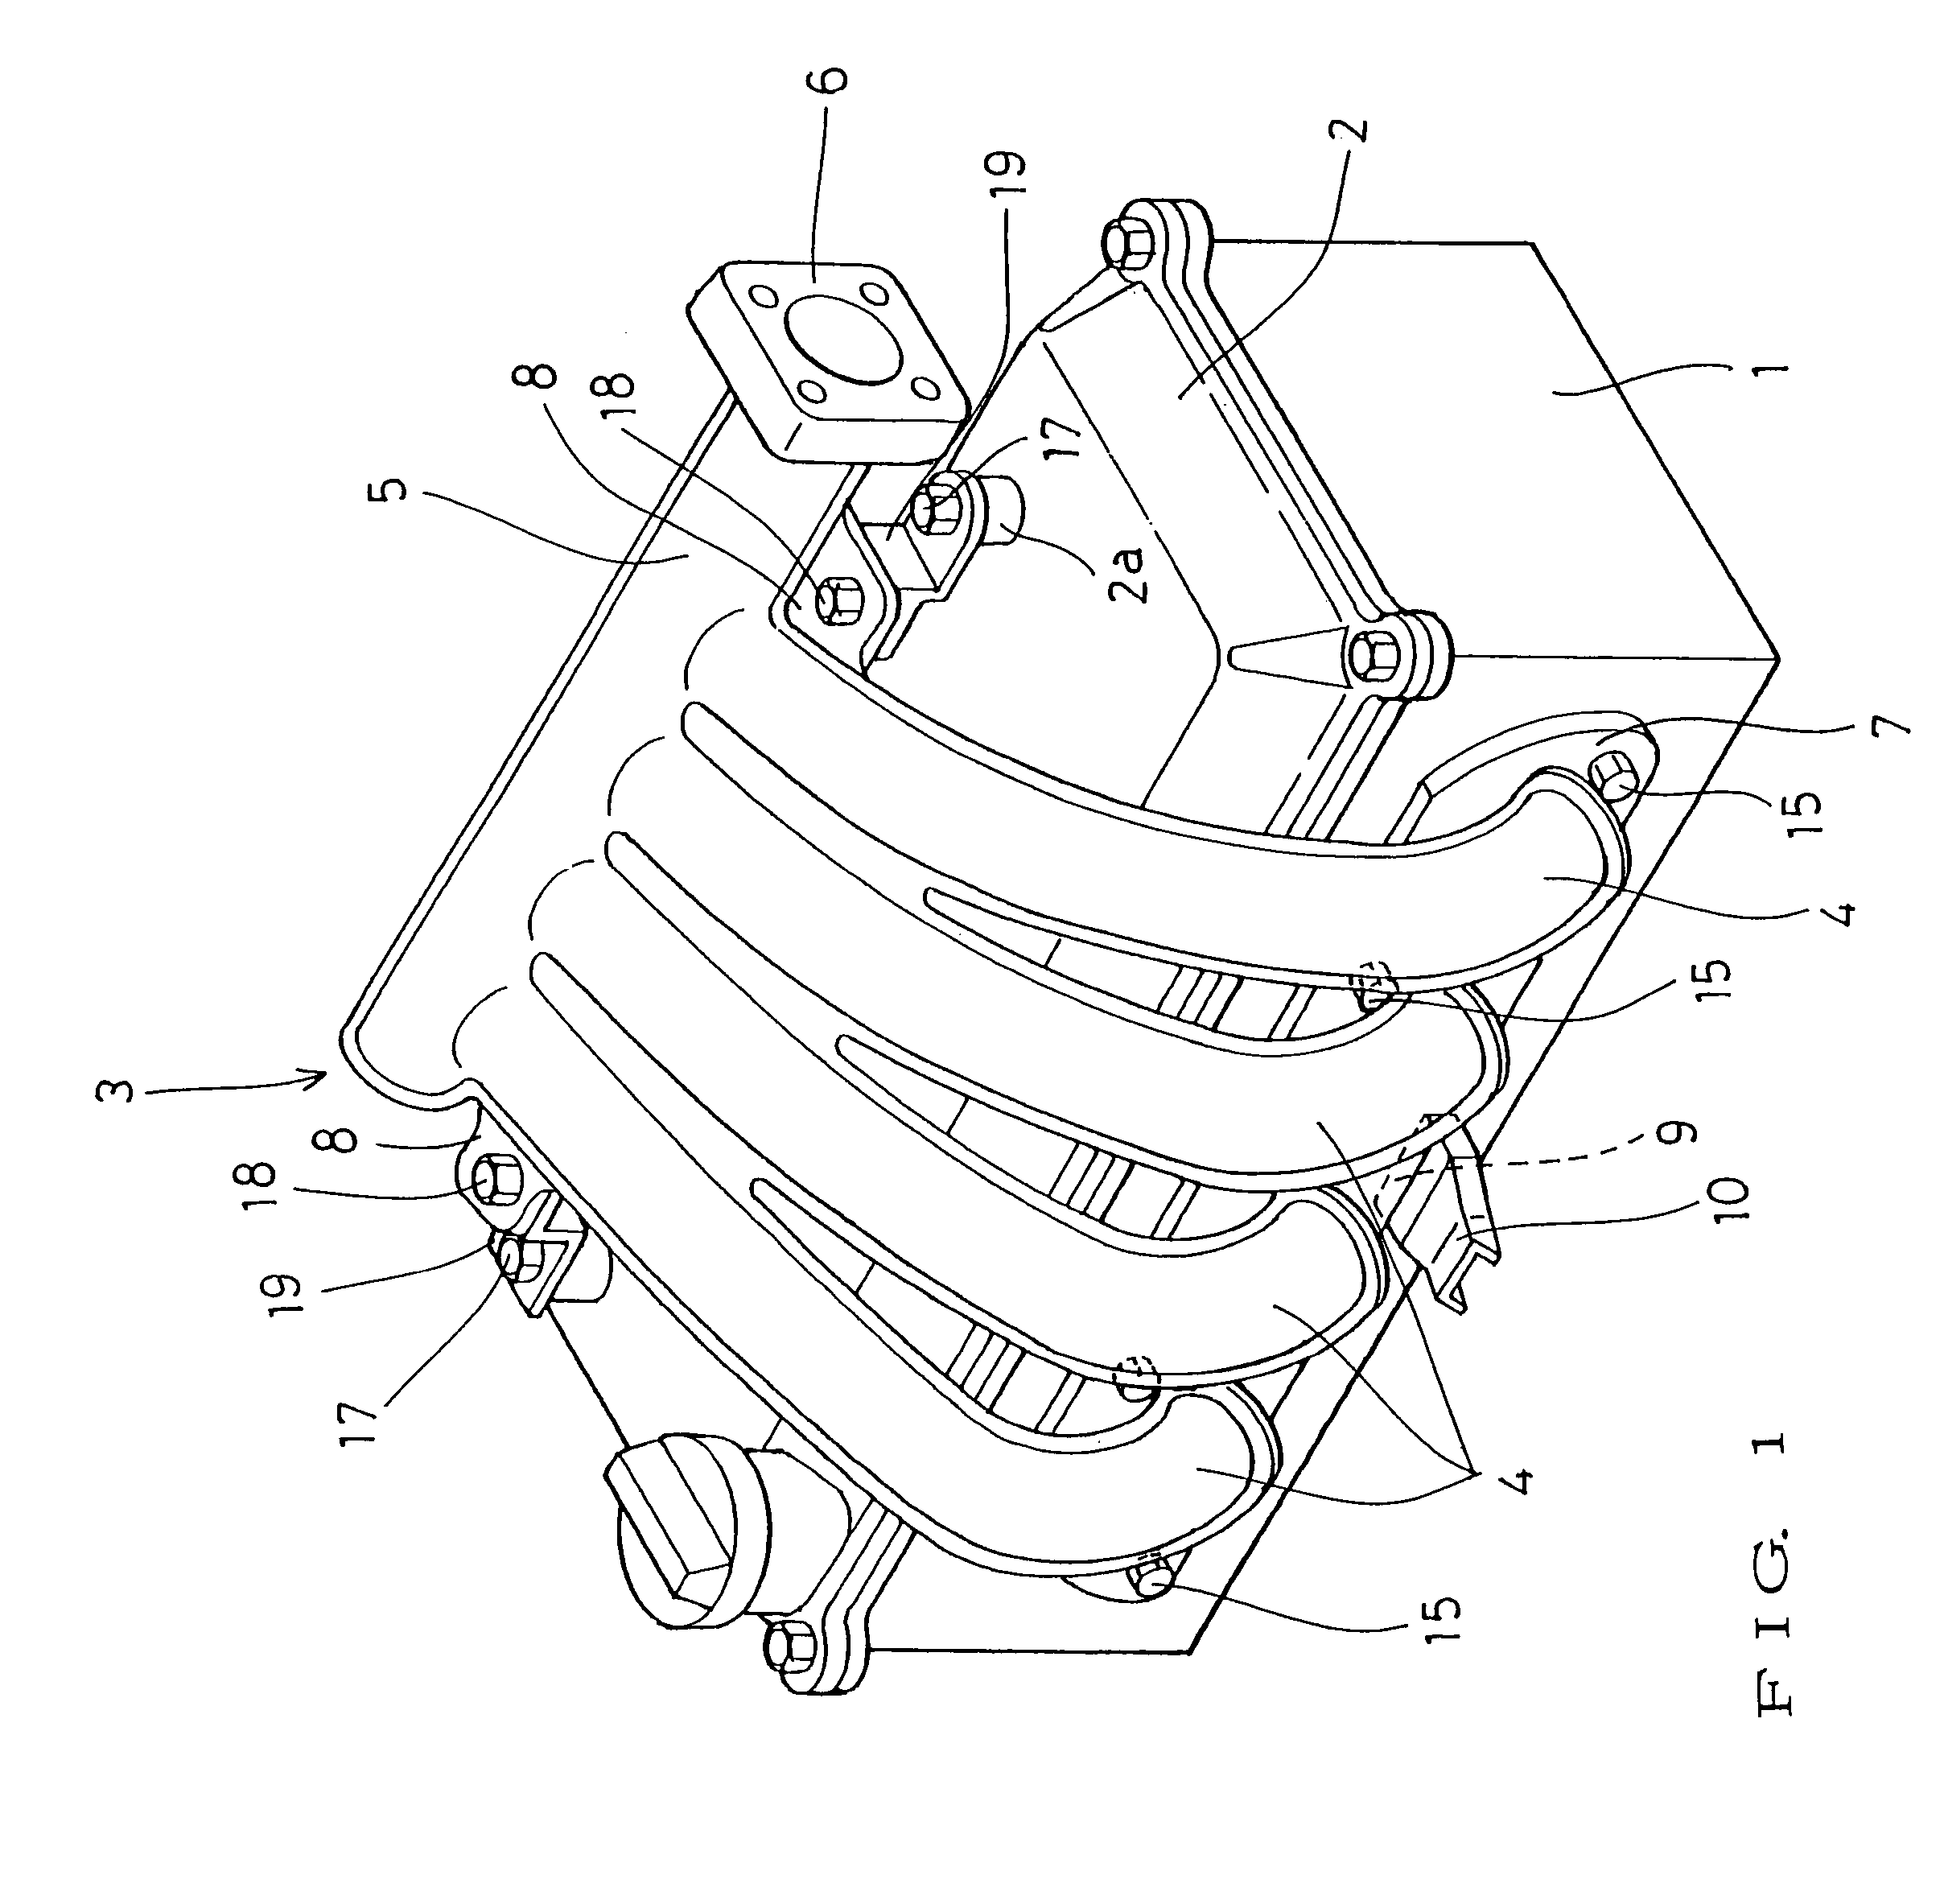 Installation structure of intake manifold